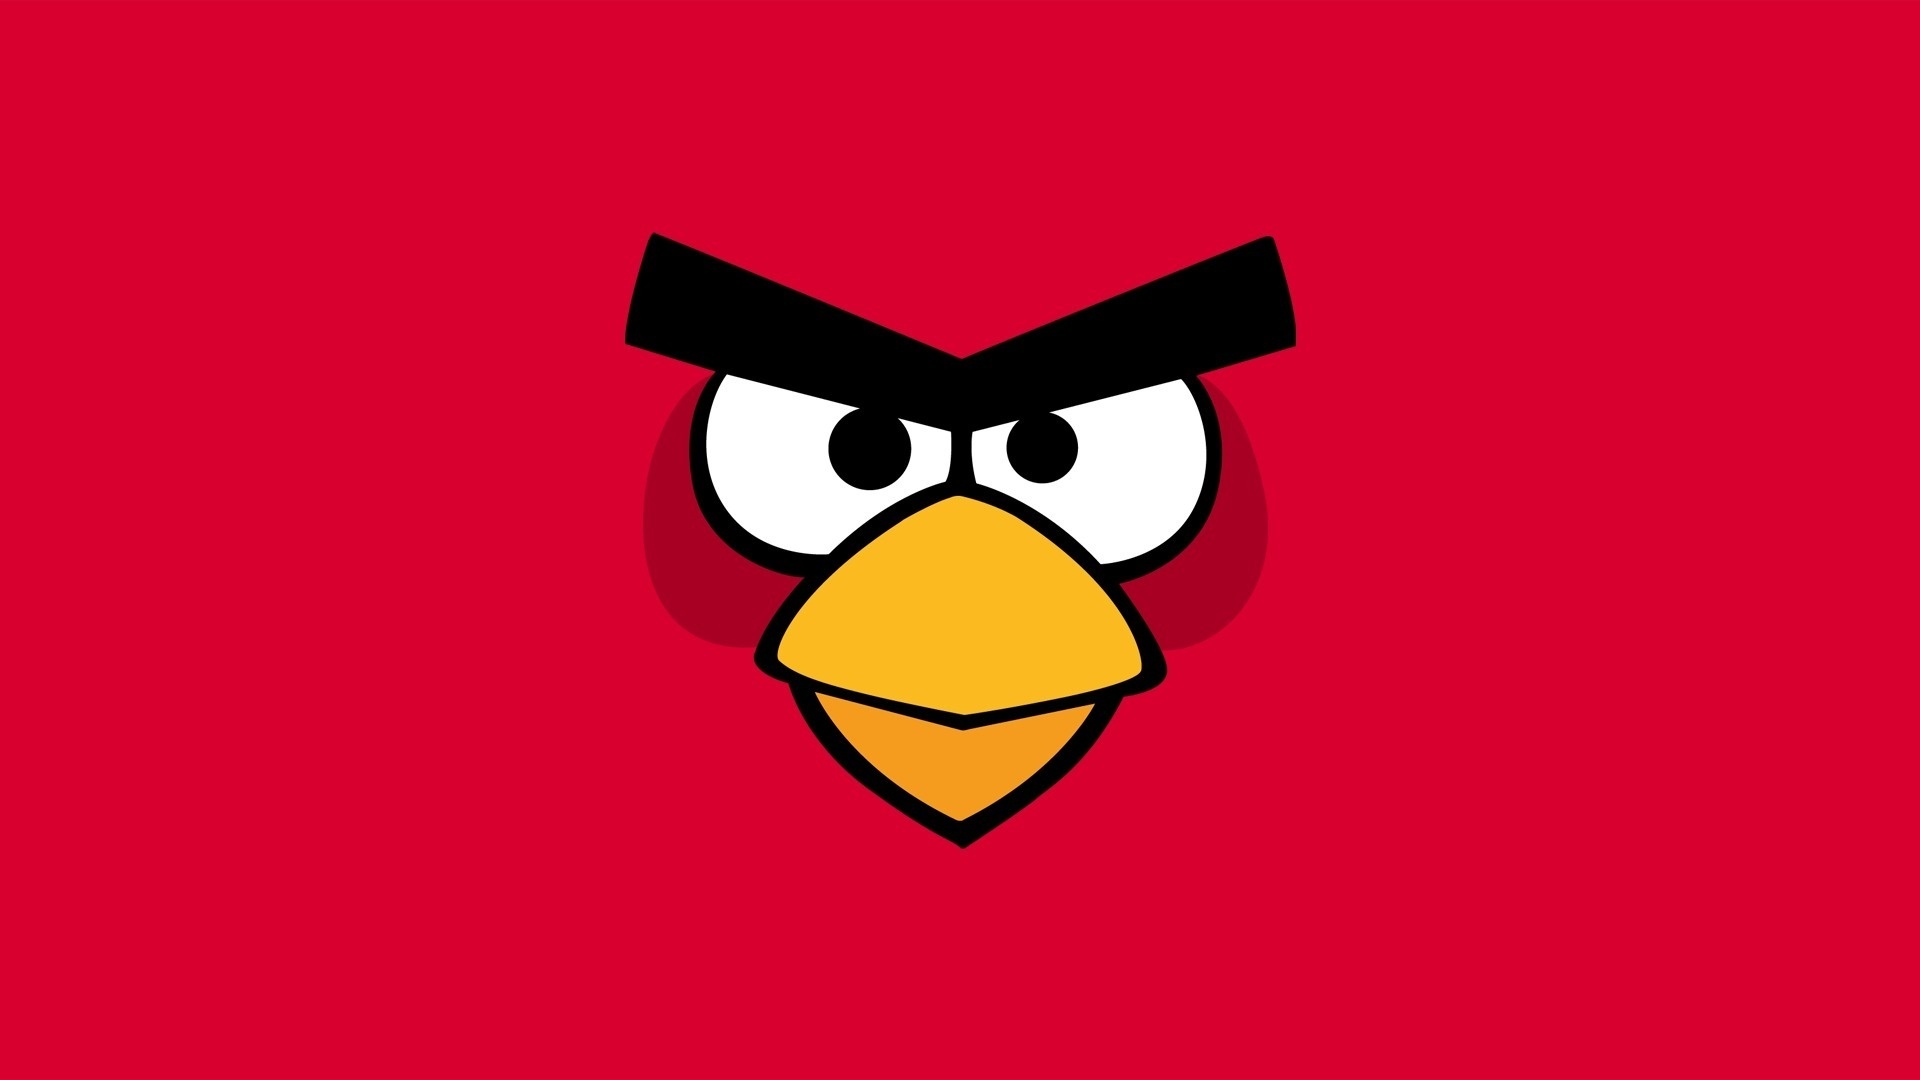 Angry Birds Full HD Fond d233cran and Arri232re plan